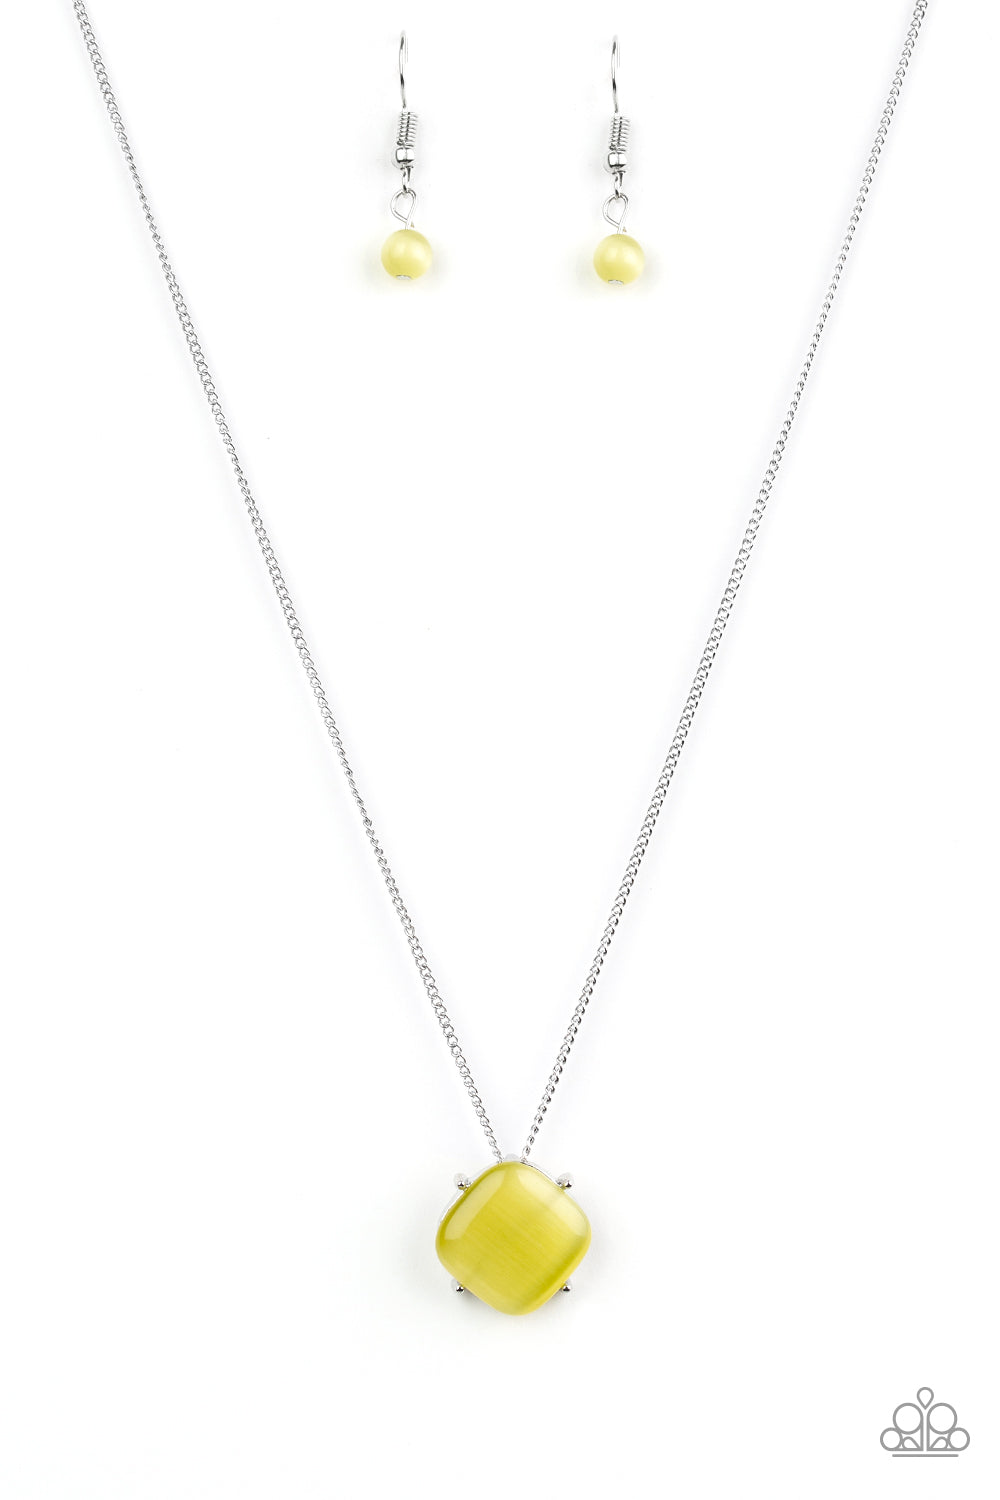 Paparazzi Accessories - You GLOW Girl - Yellow & Silver Necklace